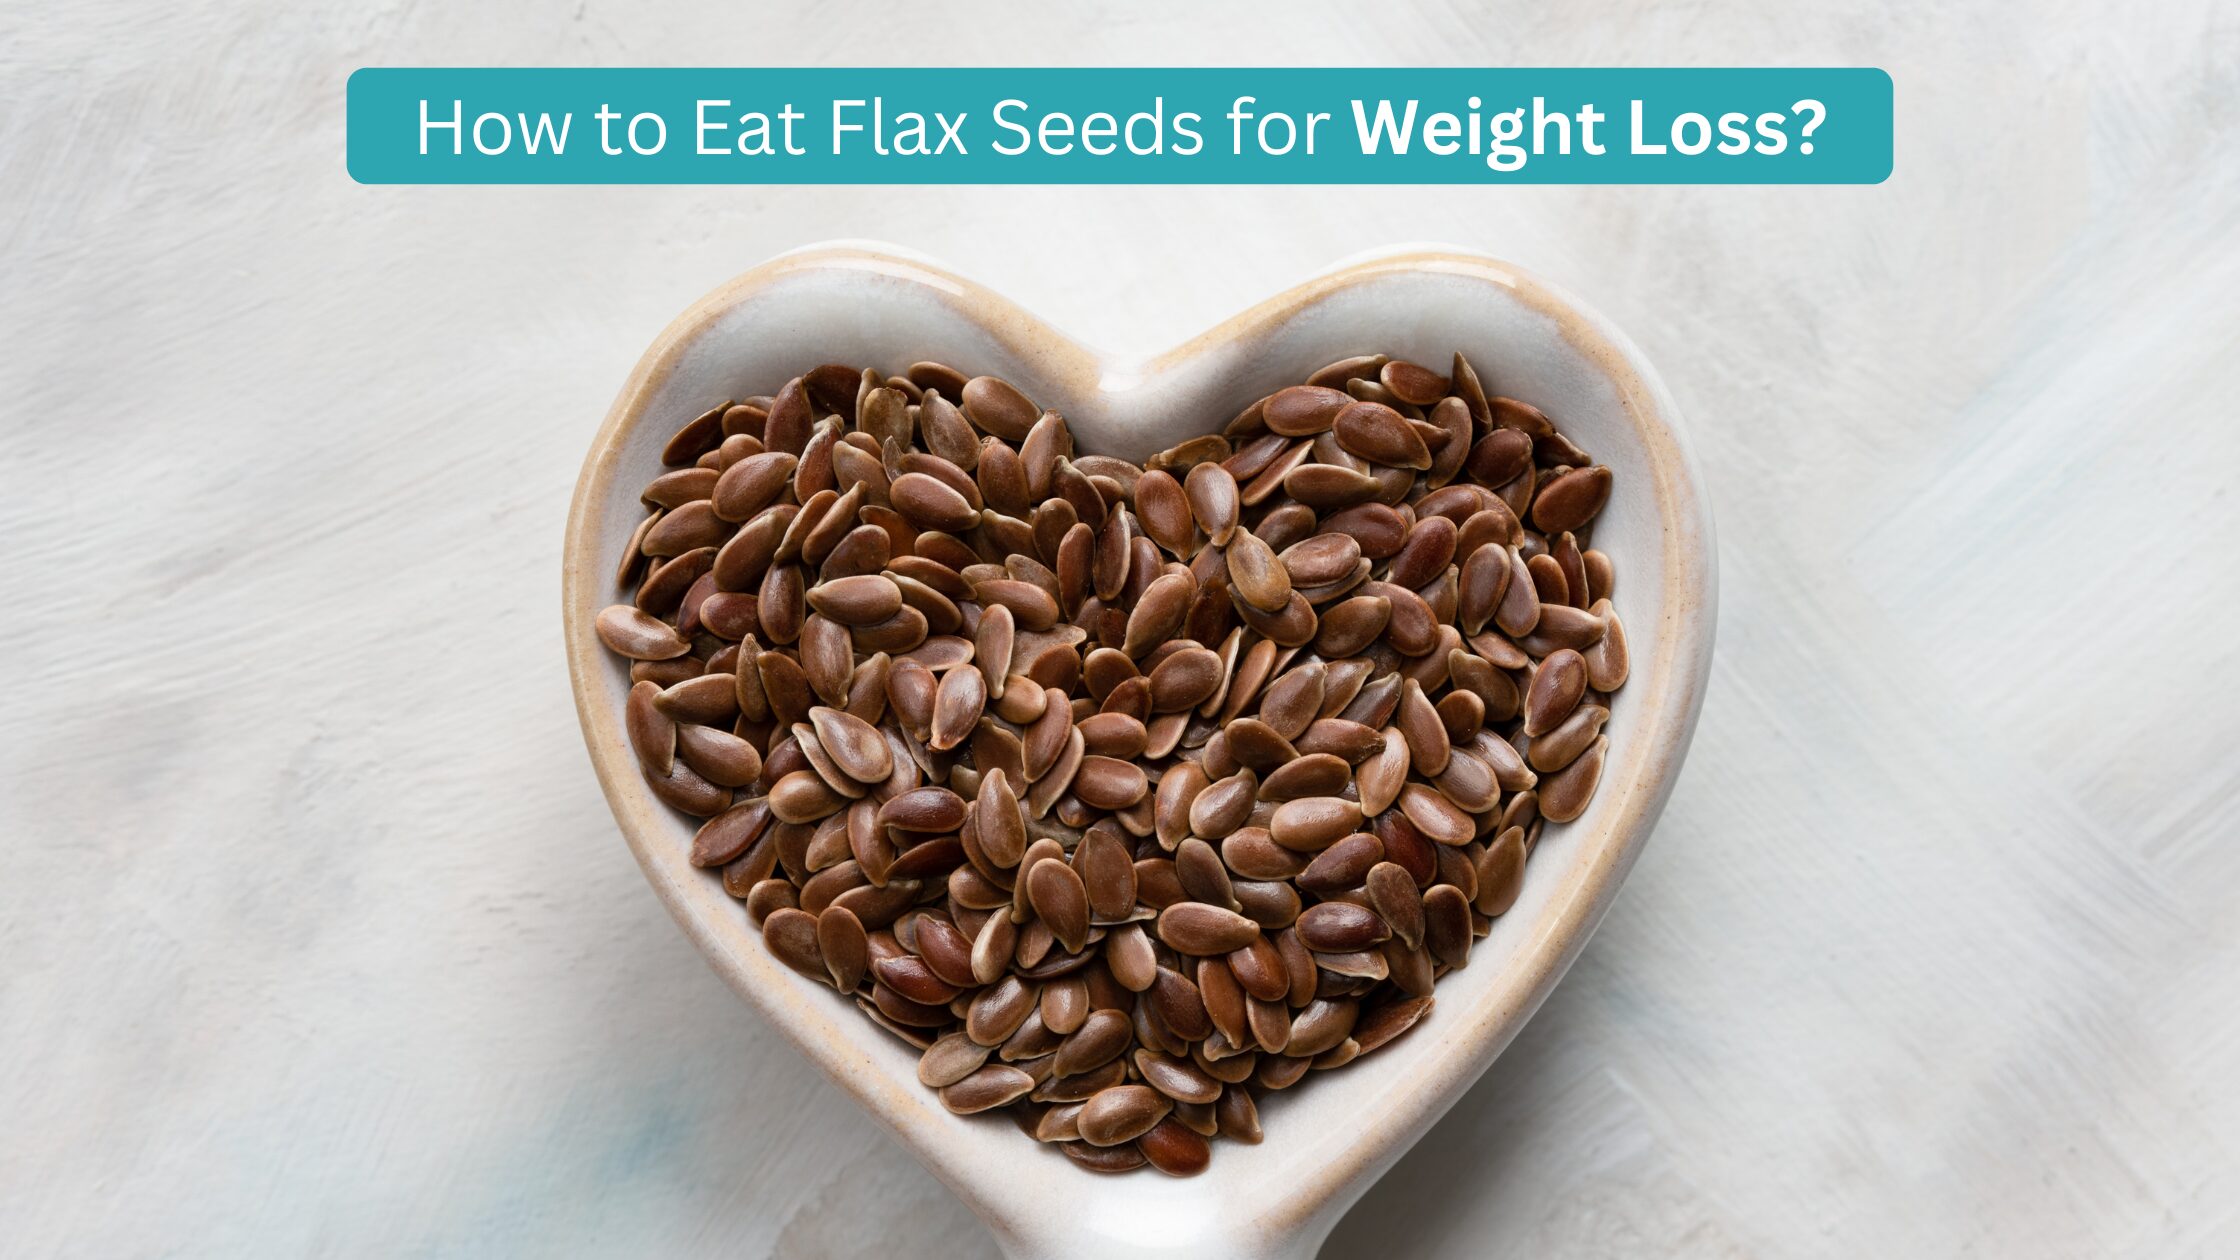 How to Eat Flax Seeds for Weight Loss?